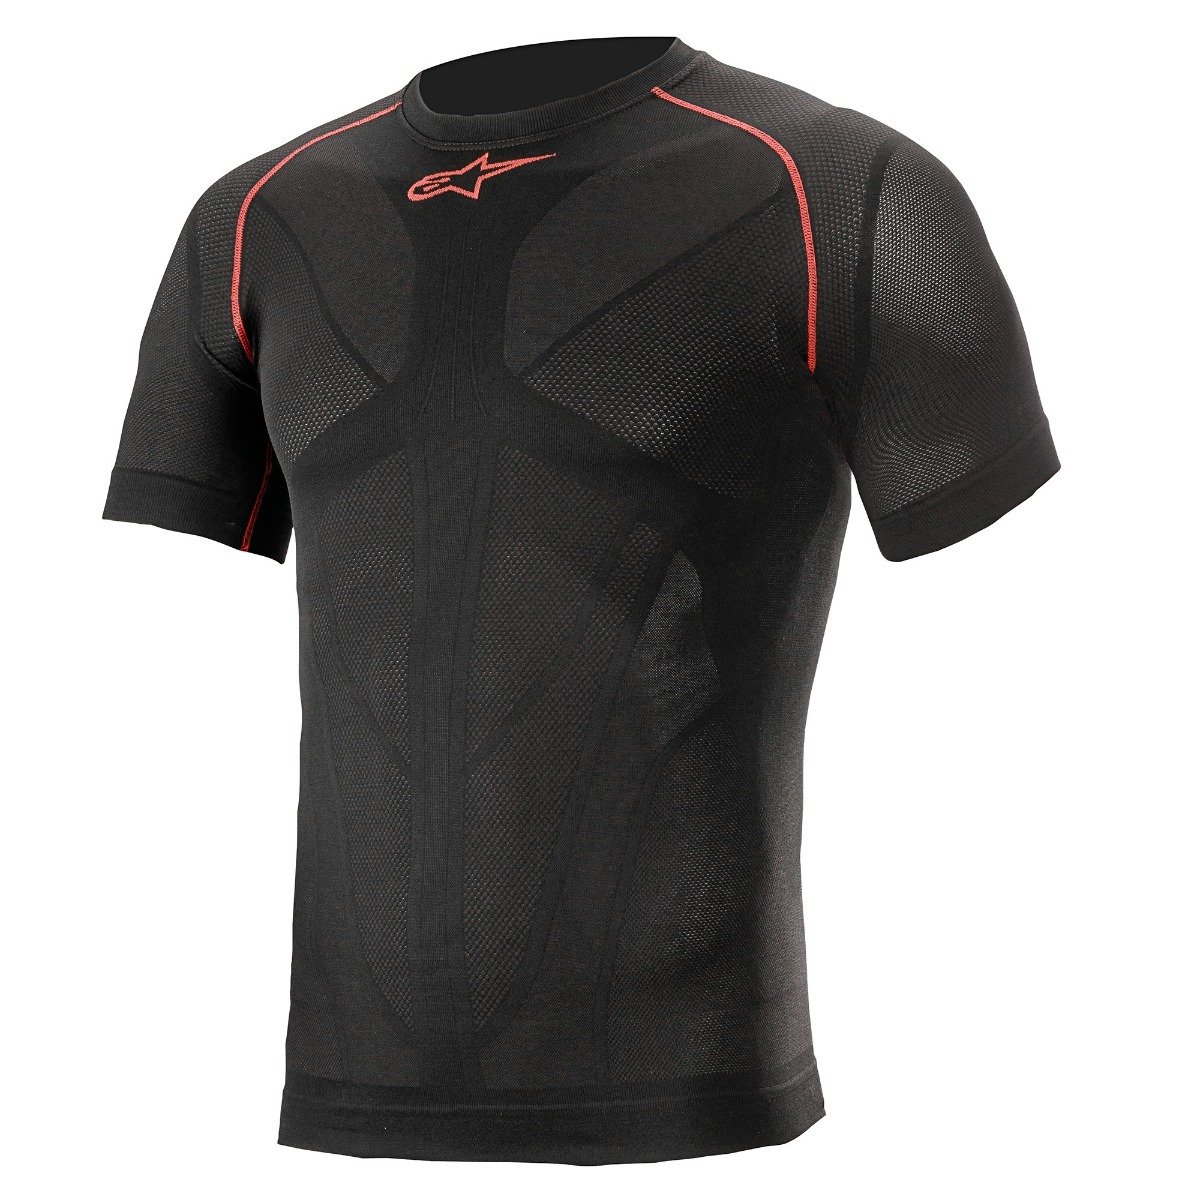 Image of Alpinestars Ride Tech V2 Top Short Sleeve Black Red Summer Taille XS-S